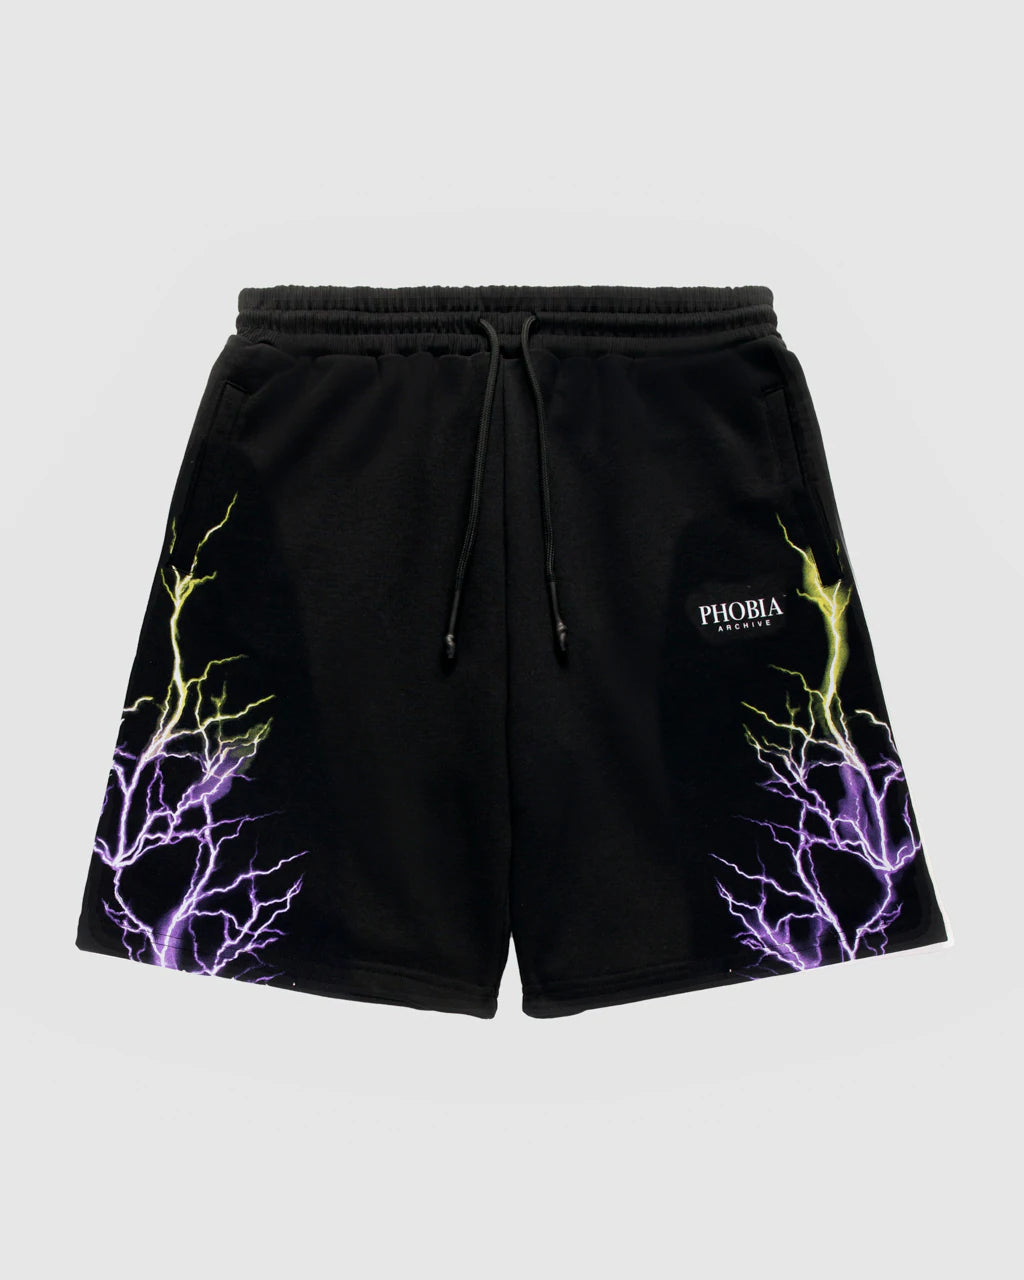 BLACK SHORTS WITH PURPLE AND YELLOW LIGHTNING